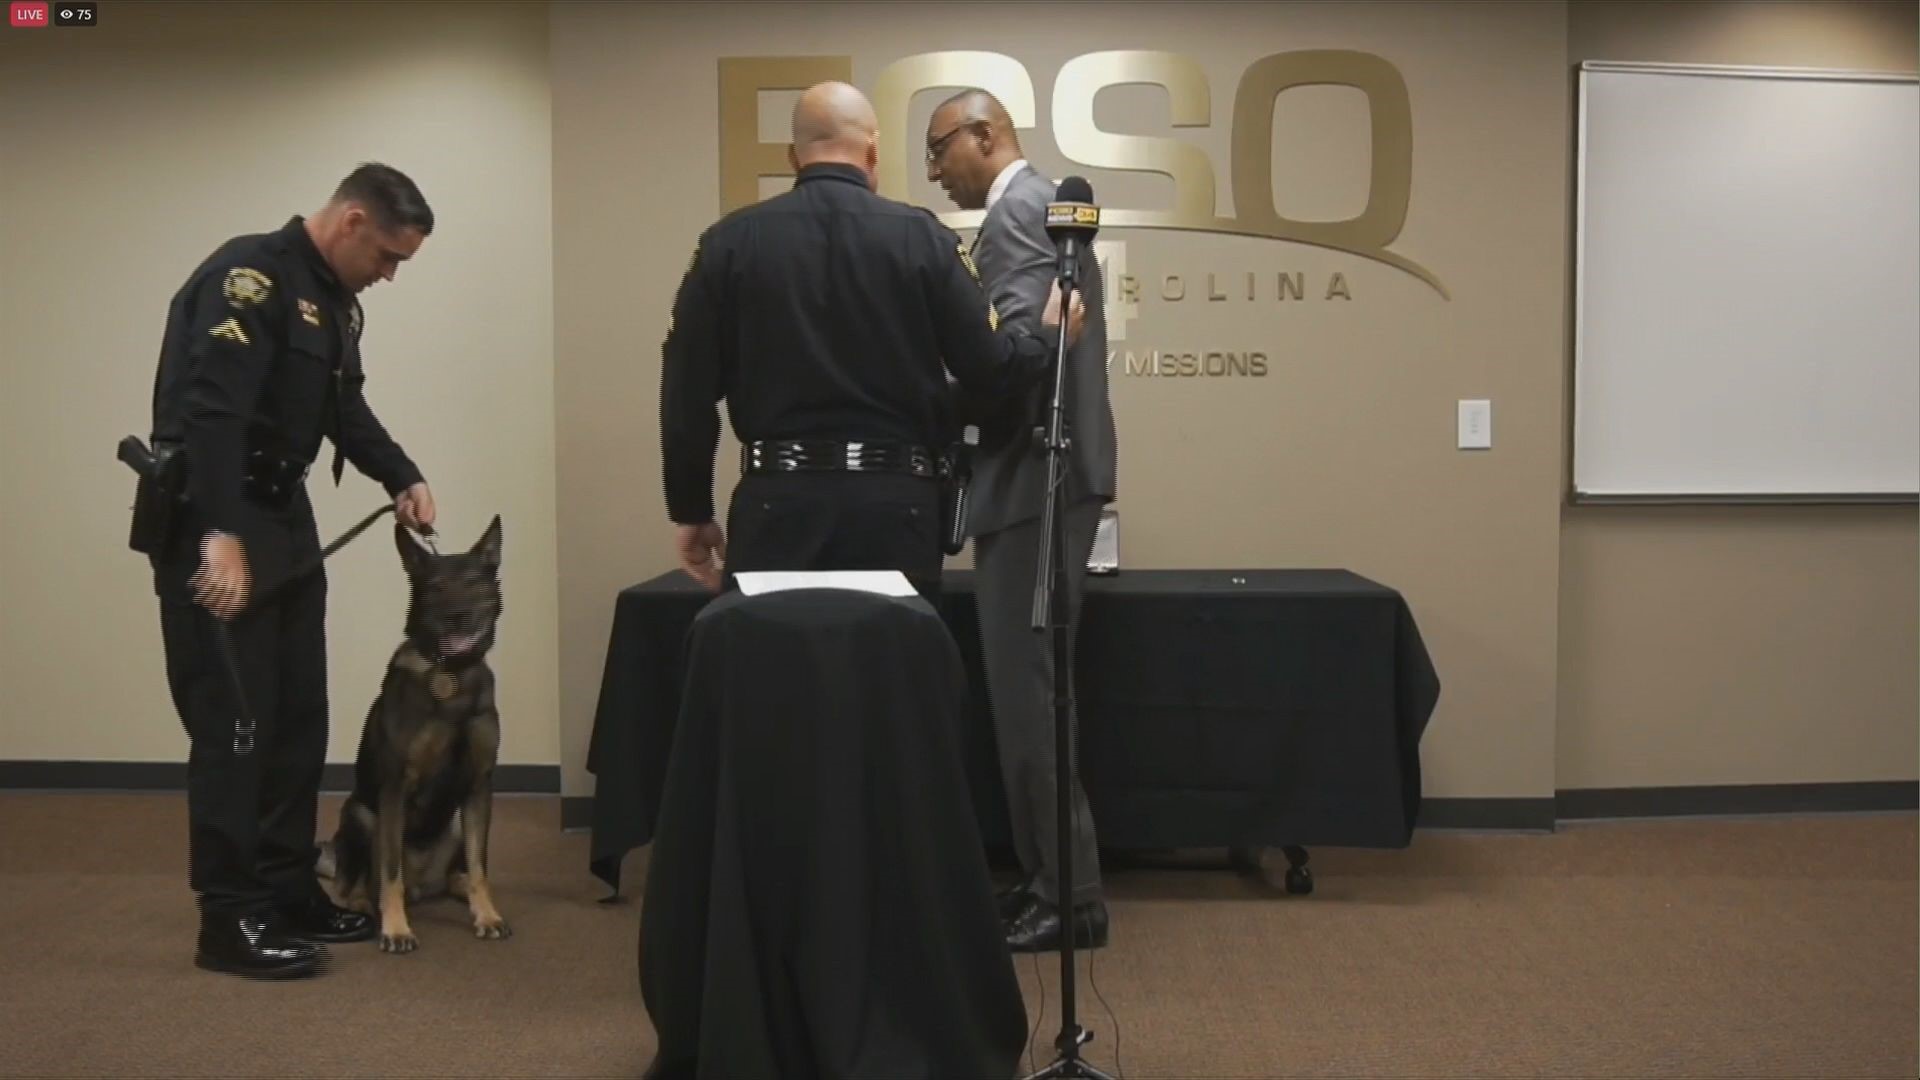 Three Forsyth County officers, including K9 Rex, received awards for acts of courage and determination.